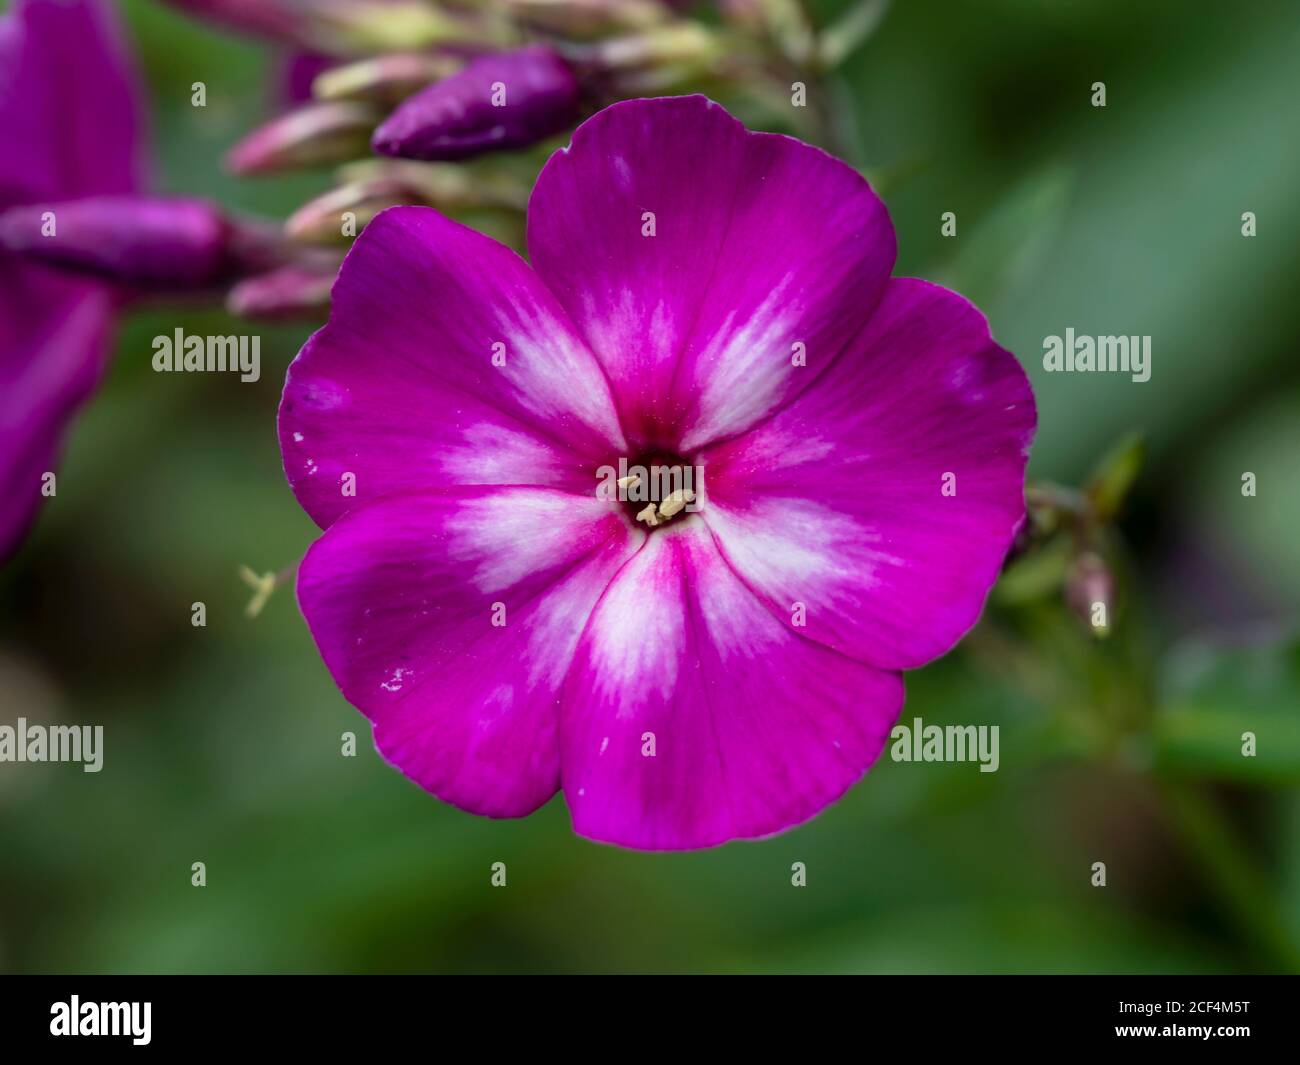 Closeup of a single pretty pink flower of Phlox paniculata, variety Velvet Flame, in a garden Stock Photo